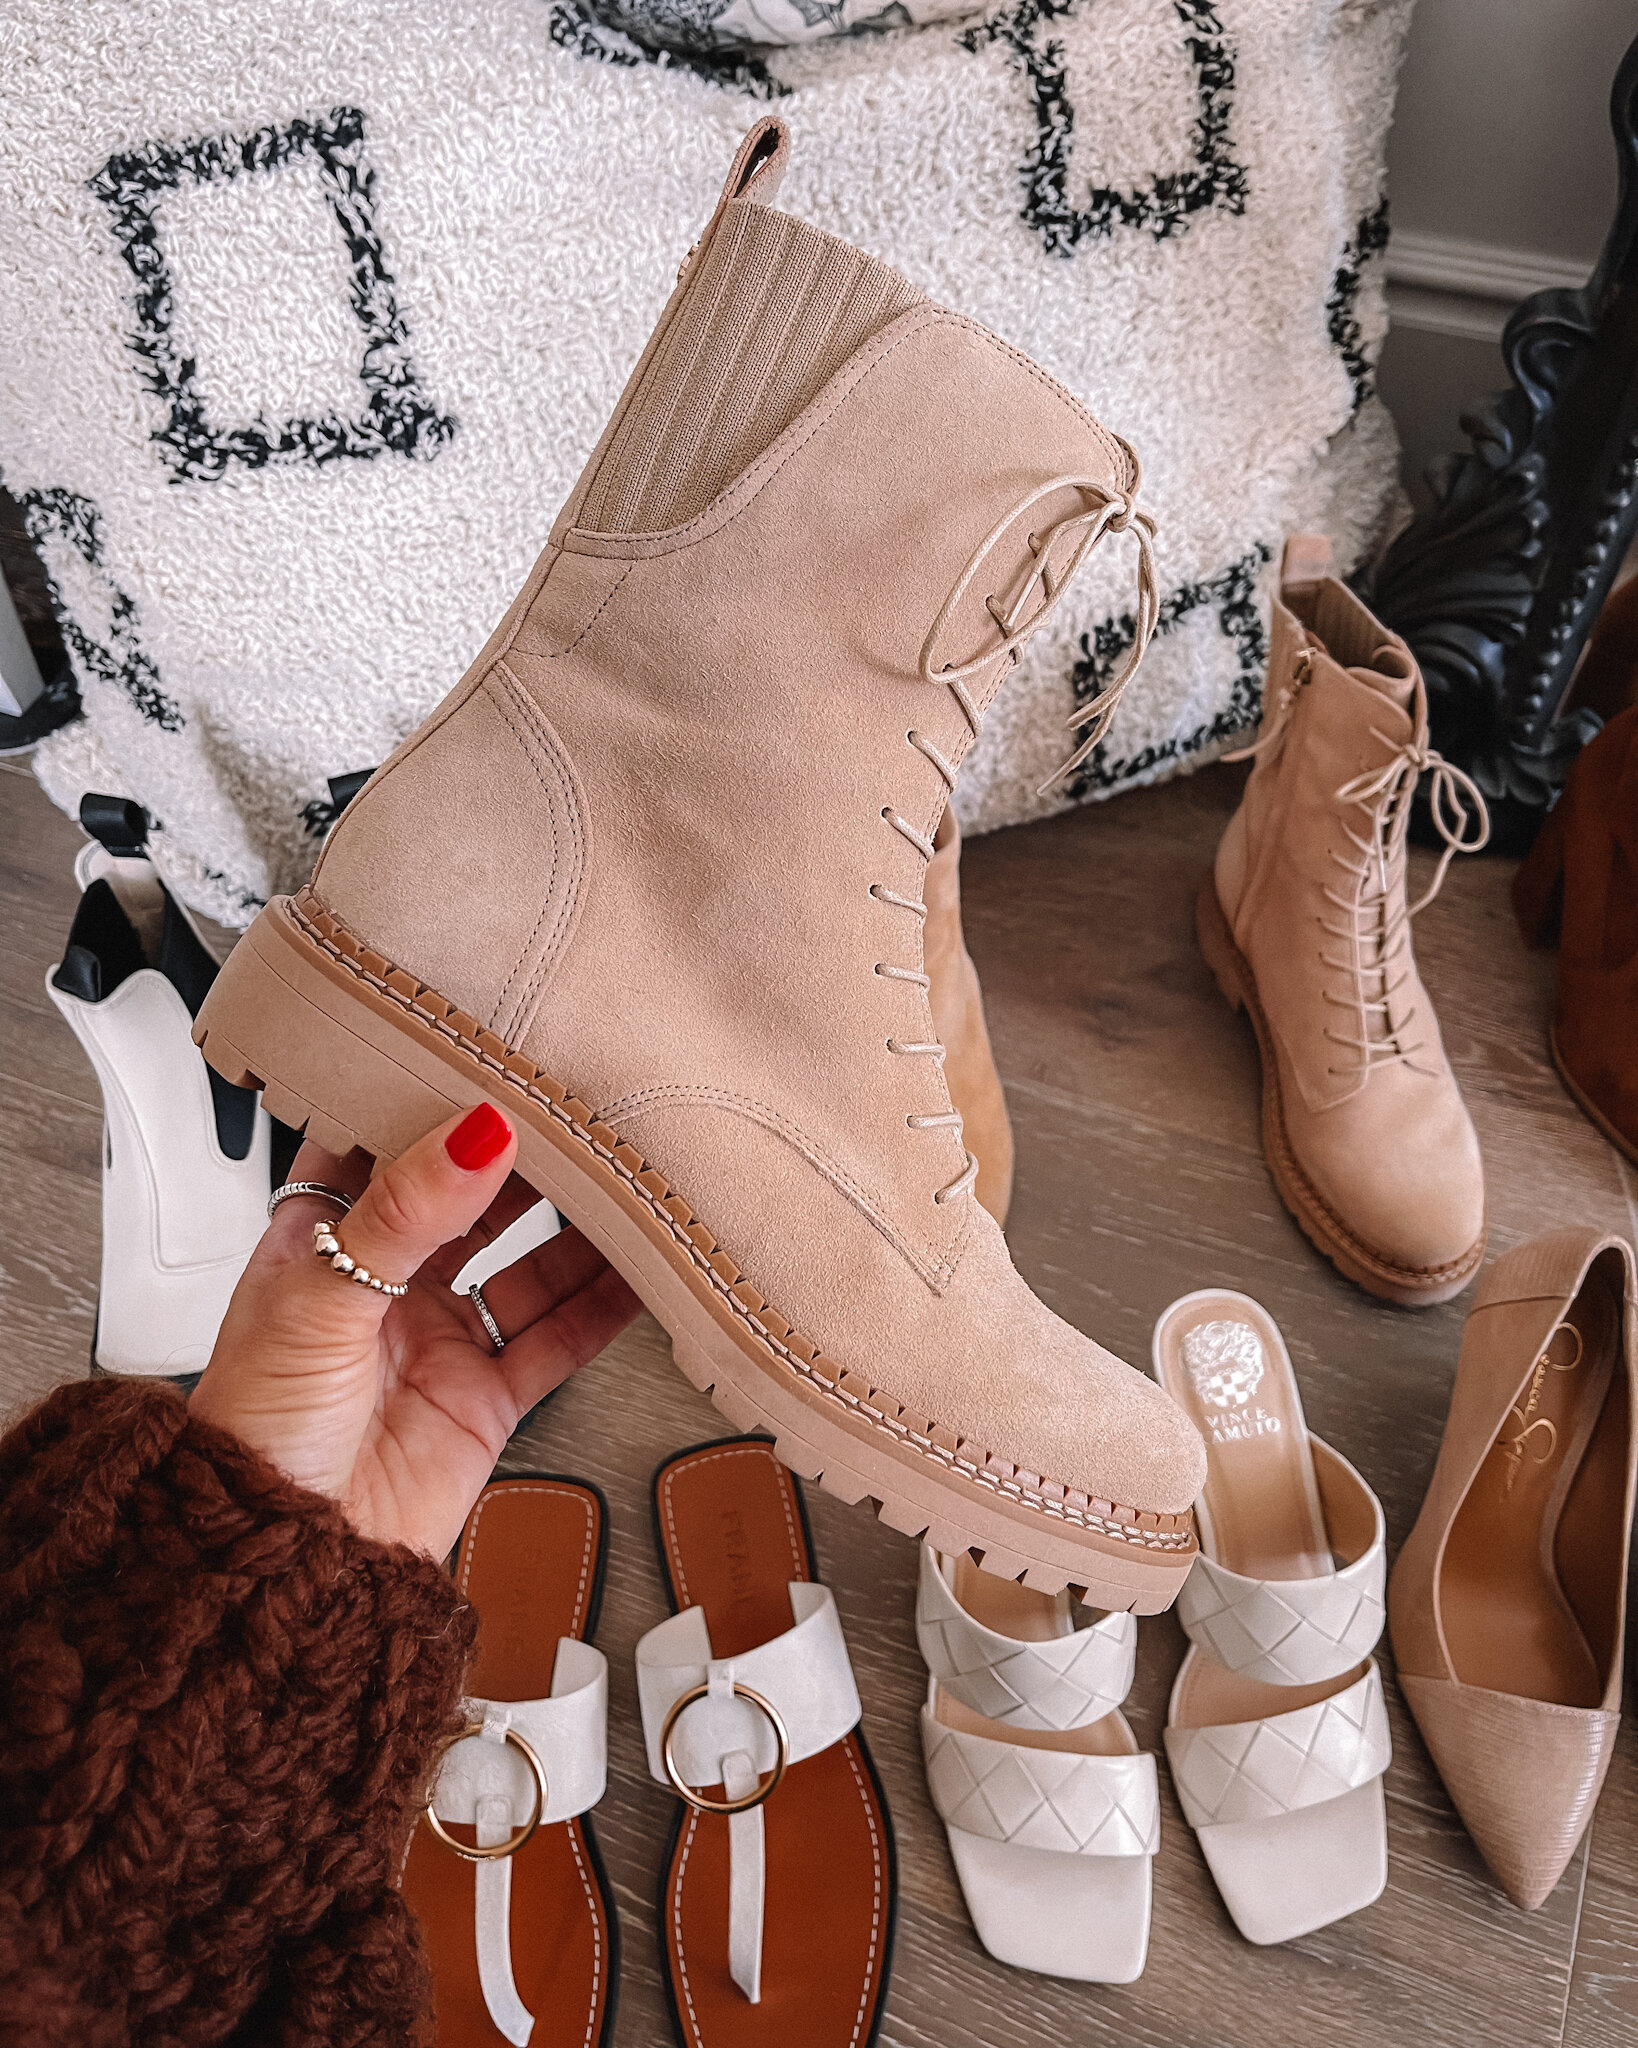 5 Ways to Style Sam Edelman — Lucy's whims